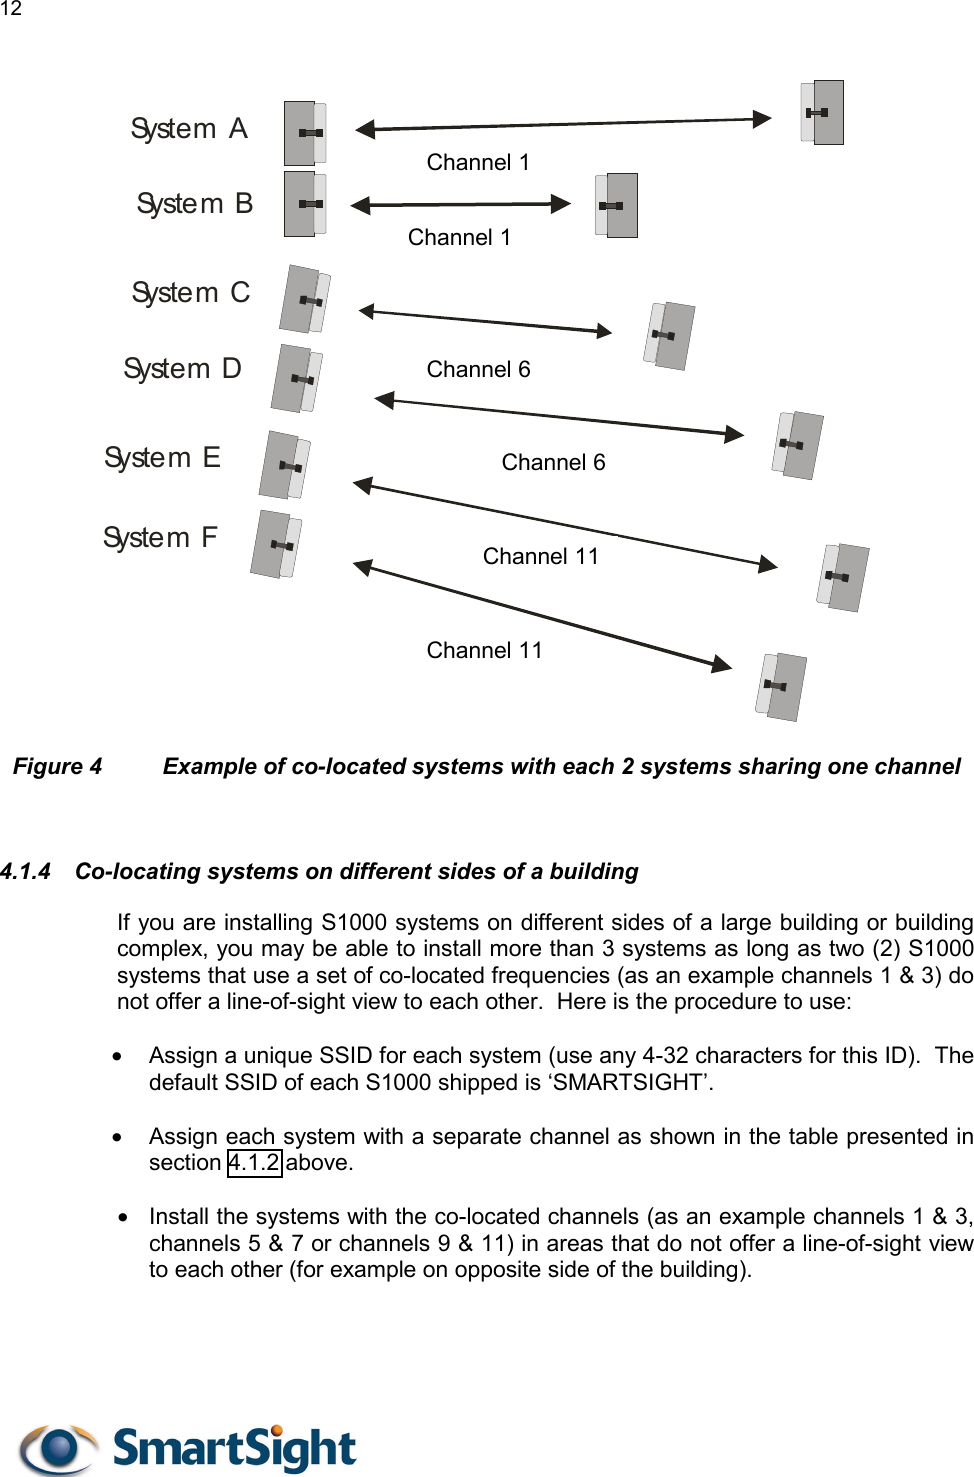 12                             Figure 4  Example of co-located systems with each 2 systems sharing one channel   4.1.4  Co-locating systems on different sides of a building  If you are installing S1000 systems on different sides of a large building or building complex, you may be able to install more than 3 systems as long as two (2) S1000 systems that use a set of co-located frequencies (as an example channels 1 &amp; 3) do not offer a line-of-sight view to each other.  Here is the procedure to use:  •  Assign a unique SSID for each system (use any 4-32 characters for this ID).  The default SSID of each S1000 shipped is ‘SMARTSIGHT’.  •  Assign each system with a separate channel as shown in the table presented in section 4.1.2 above.  •  Install the systems with the co-located channels (as an example channels 1 &amp; 3, channels 5 &amp; 7 or channels 9 &amp; 11) in areas that do not offer a line-of-sight view to each other (for example on opposite side of the building).   Sy st e m  ASy st e m  BSy st e m  CSy st e m  DSy st e m  ESy st e m  FChannel 1 Channel 1 Channel 6 Channel 6 Channel 11 Channel 11 